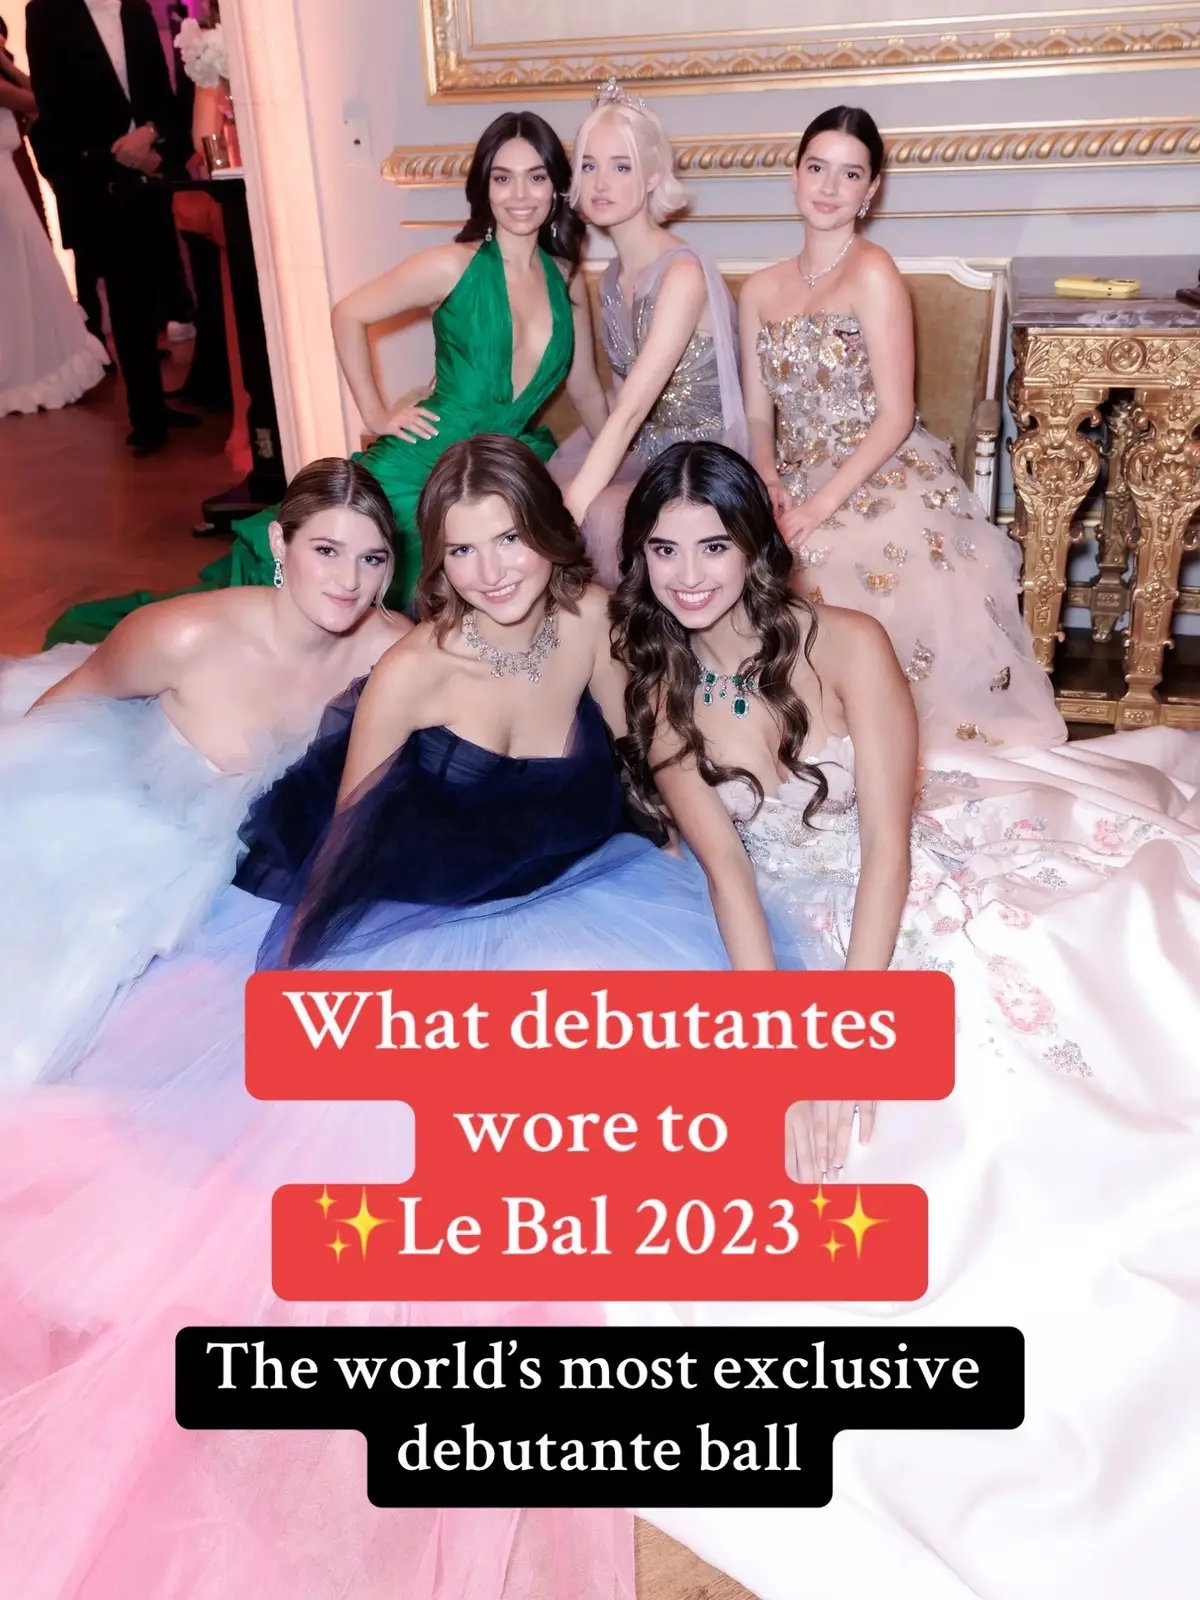 For more info on who are the debutantes, check out the other videos in my Le Bal playlist!   #lebal #lebal2023 #lebaldesdebutantes #debutanteball #debutante #highsociety #socialites #oldmoney #quietluxury #crazyrichasians #fyp #viral   #greenscreen #guopei #hautecouture #laracosimahenckelvondonnersmarck #laracosima #couturedress #europeanroyalty #aristocrat